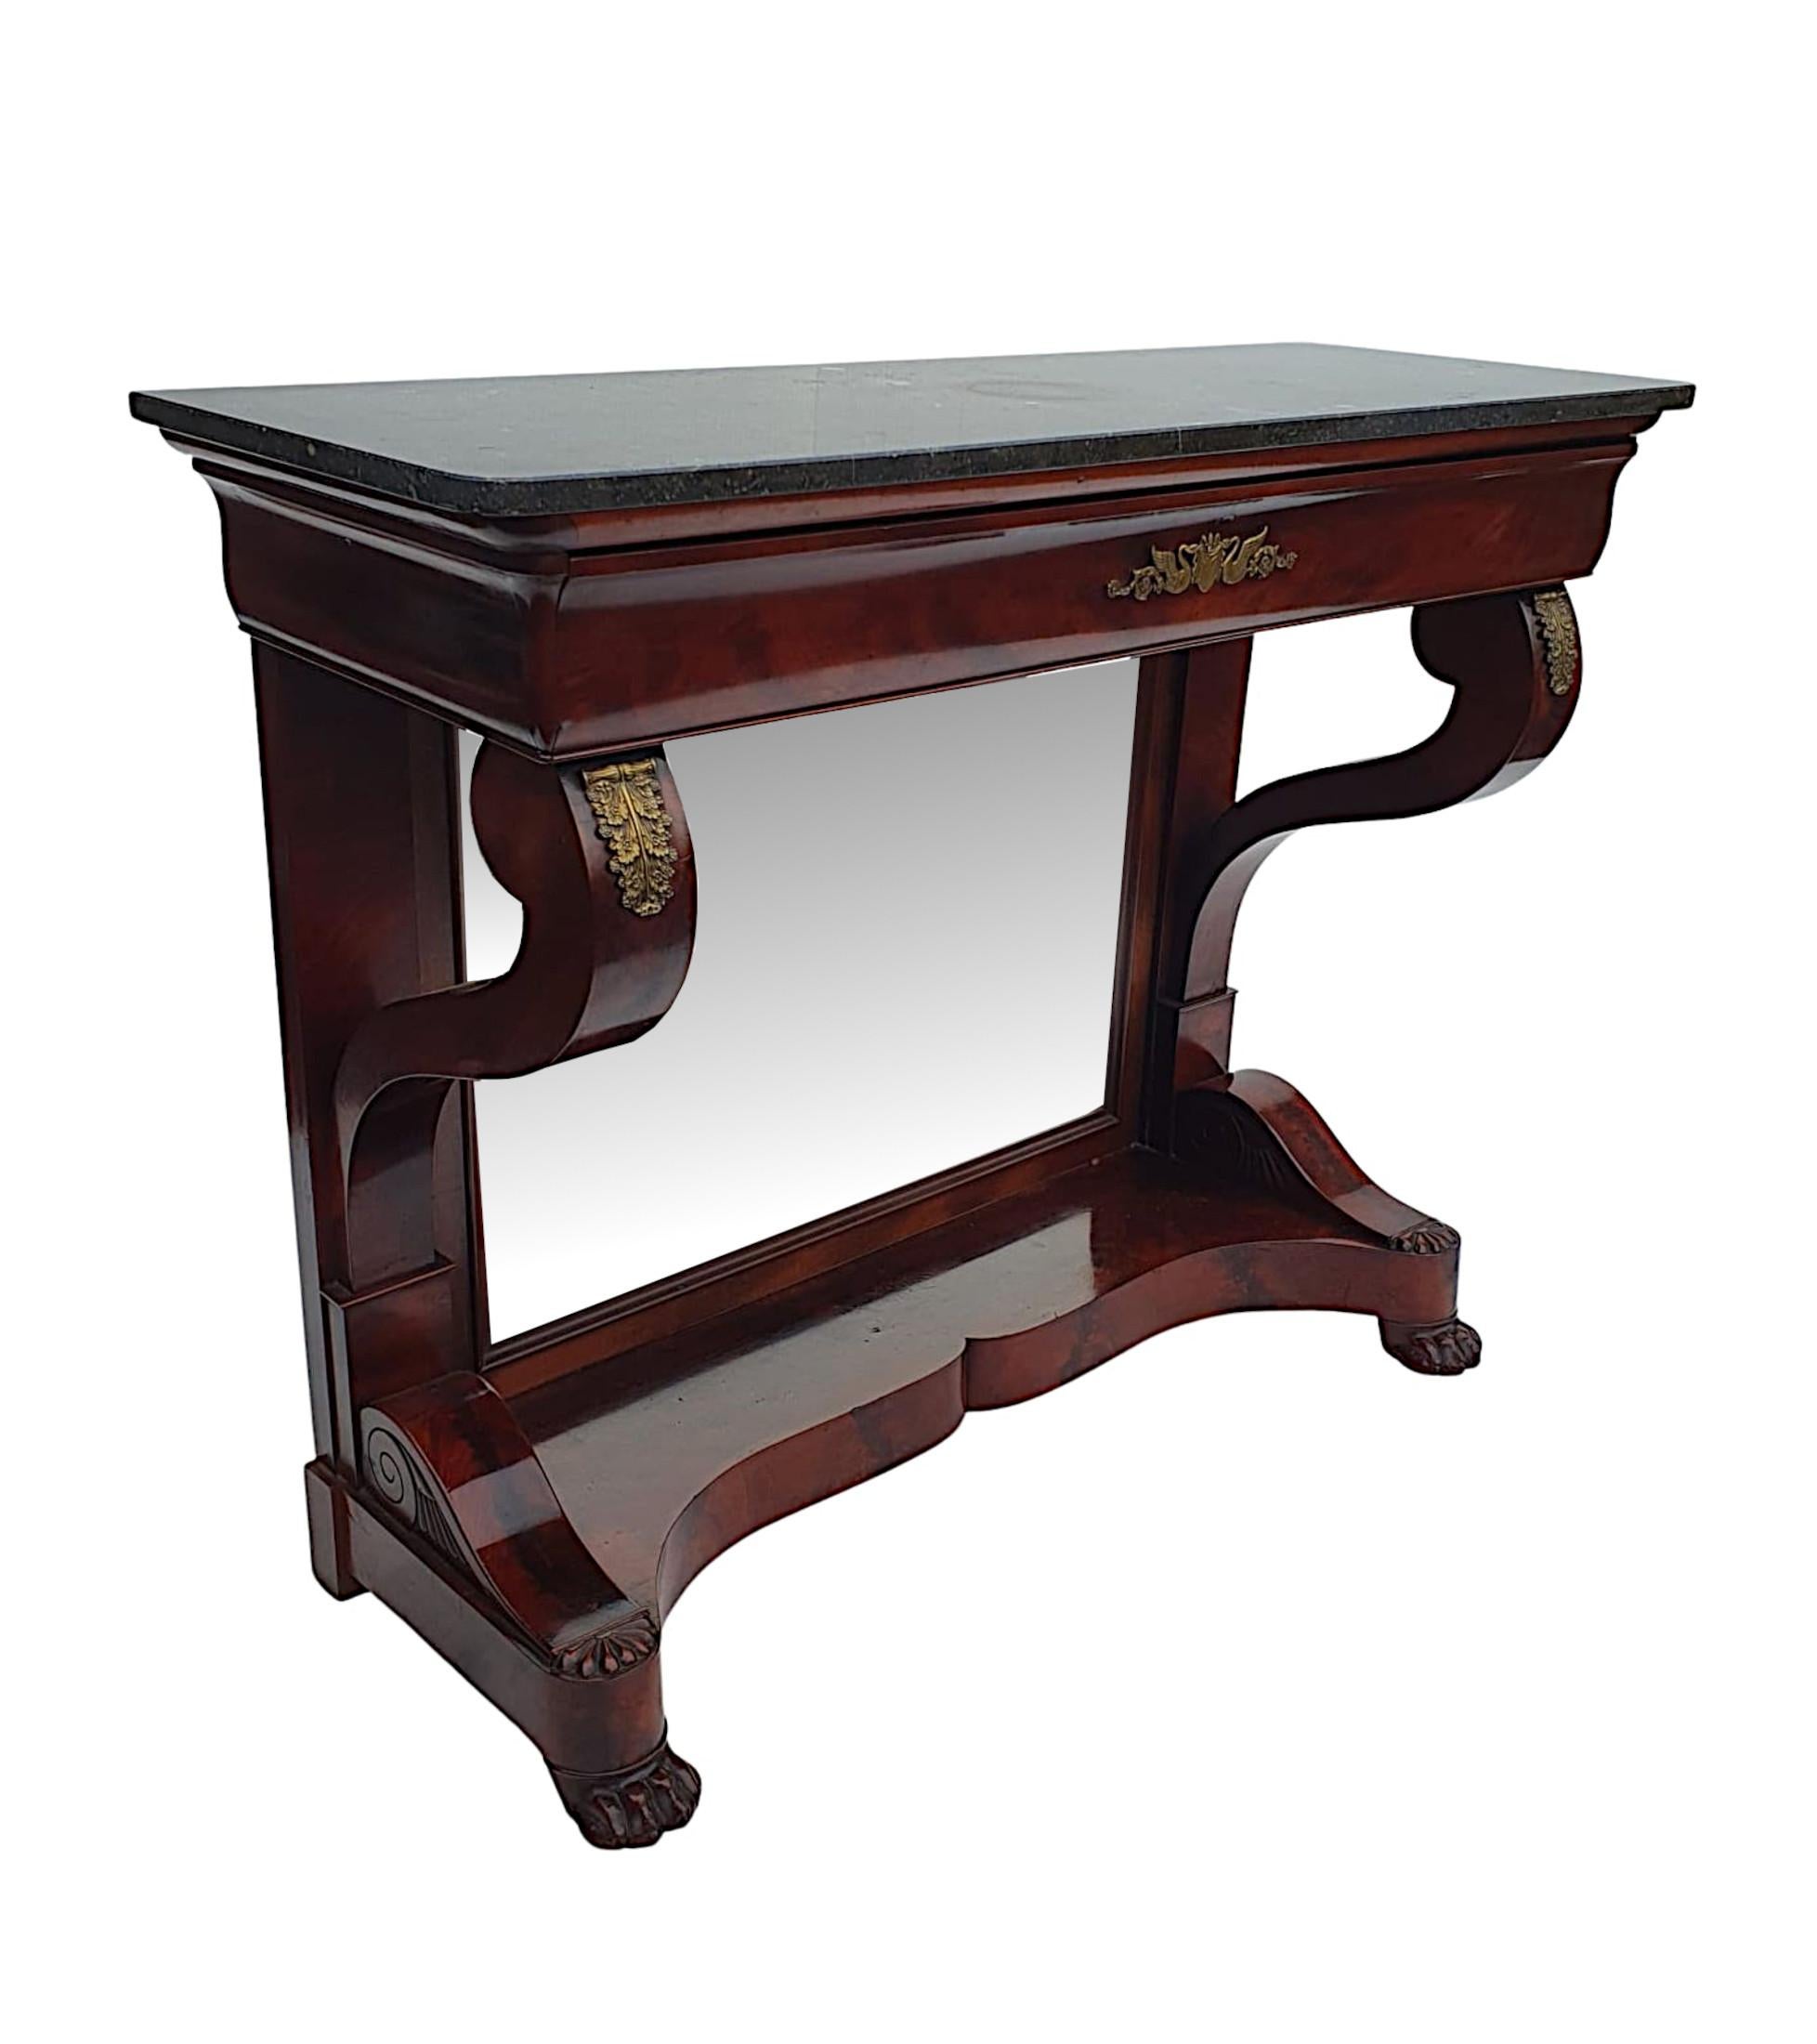 A very fine 19th Century flame mahogany console table. The moulded Marquina Black marble top raised over curved frieze with full width single long drawer and centred ornate ormolu mount depicting a pair of swans and foliate detail. Supported above